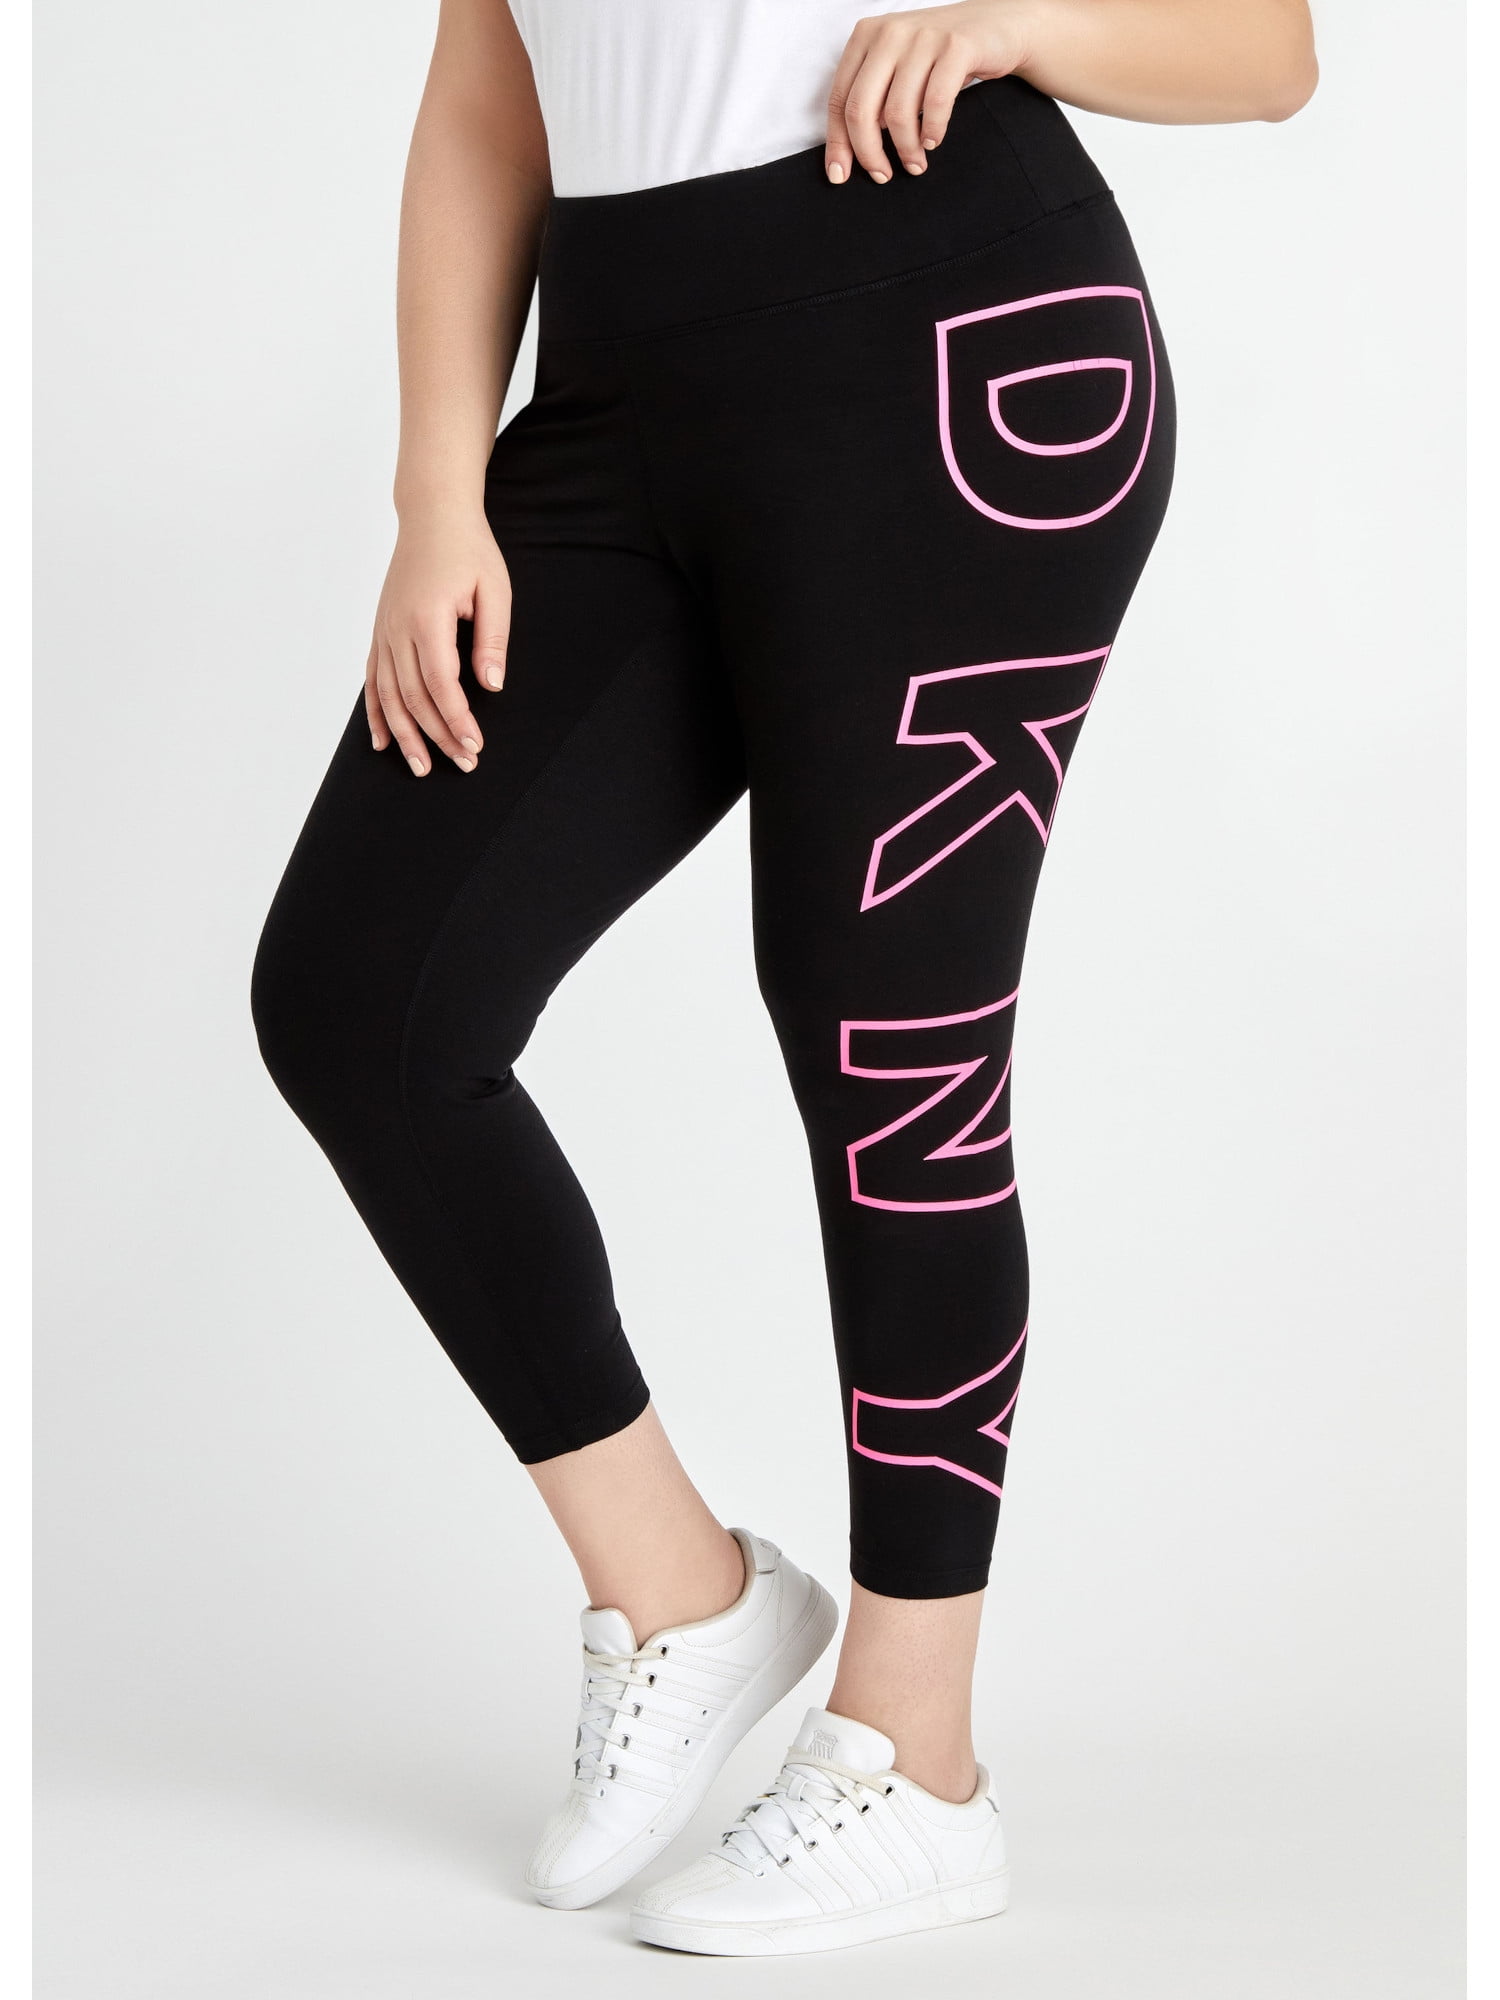 DKNY SPORT Women's High Waisted Leggings with Side Pockets - need1